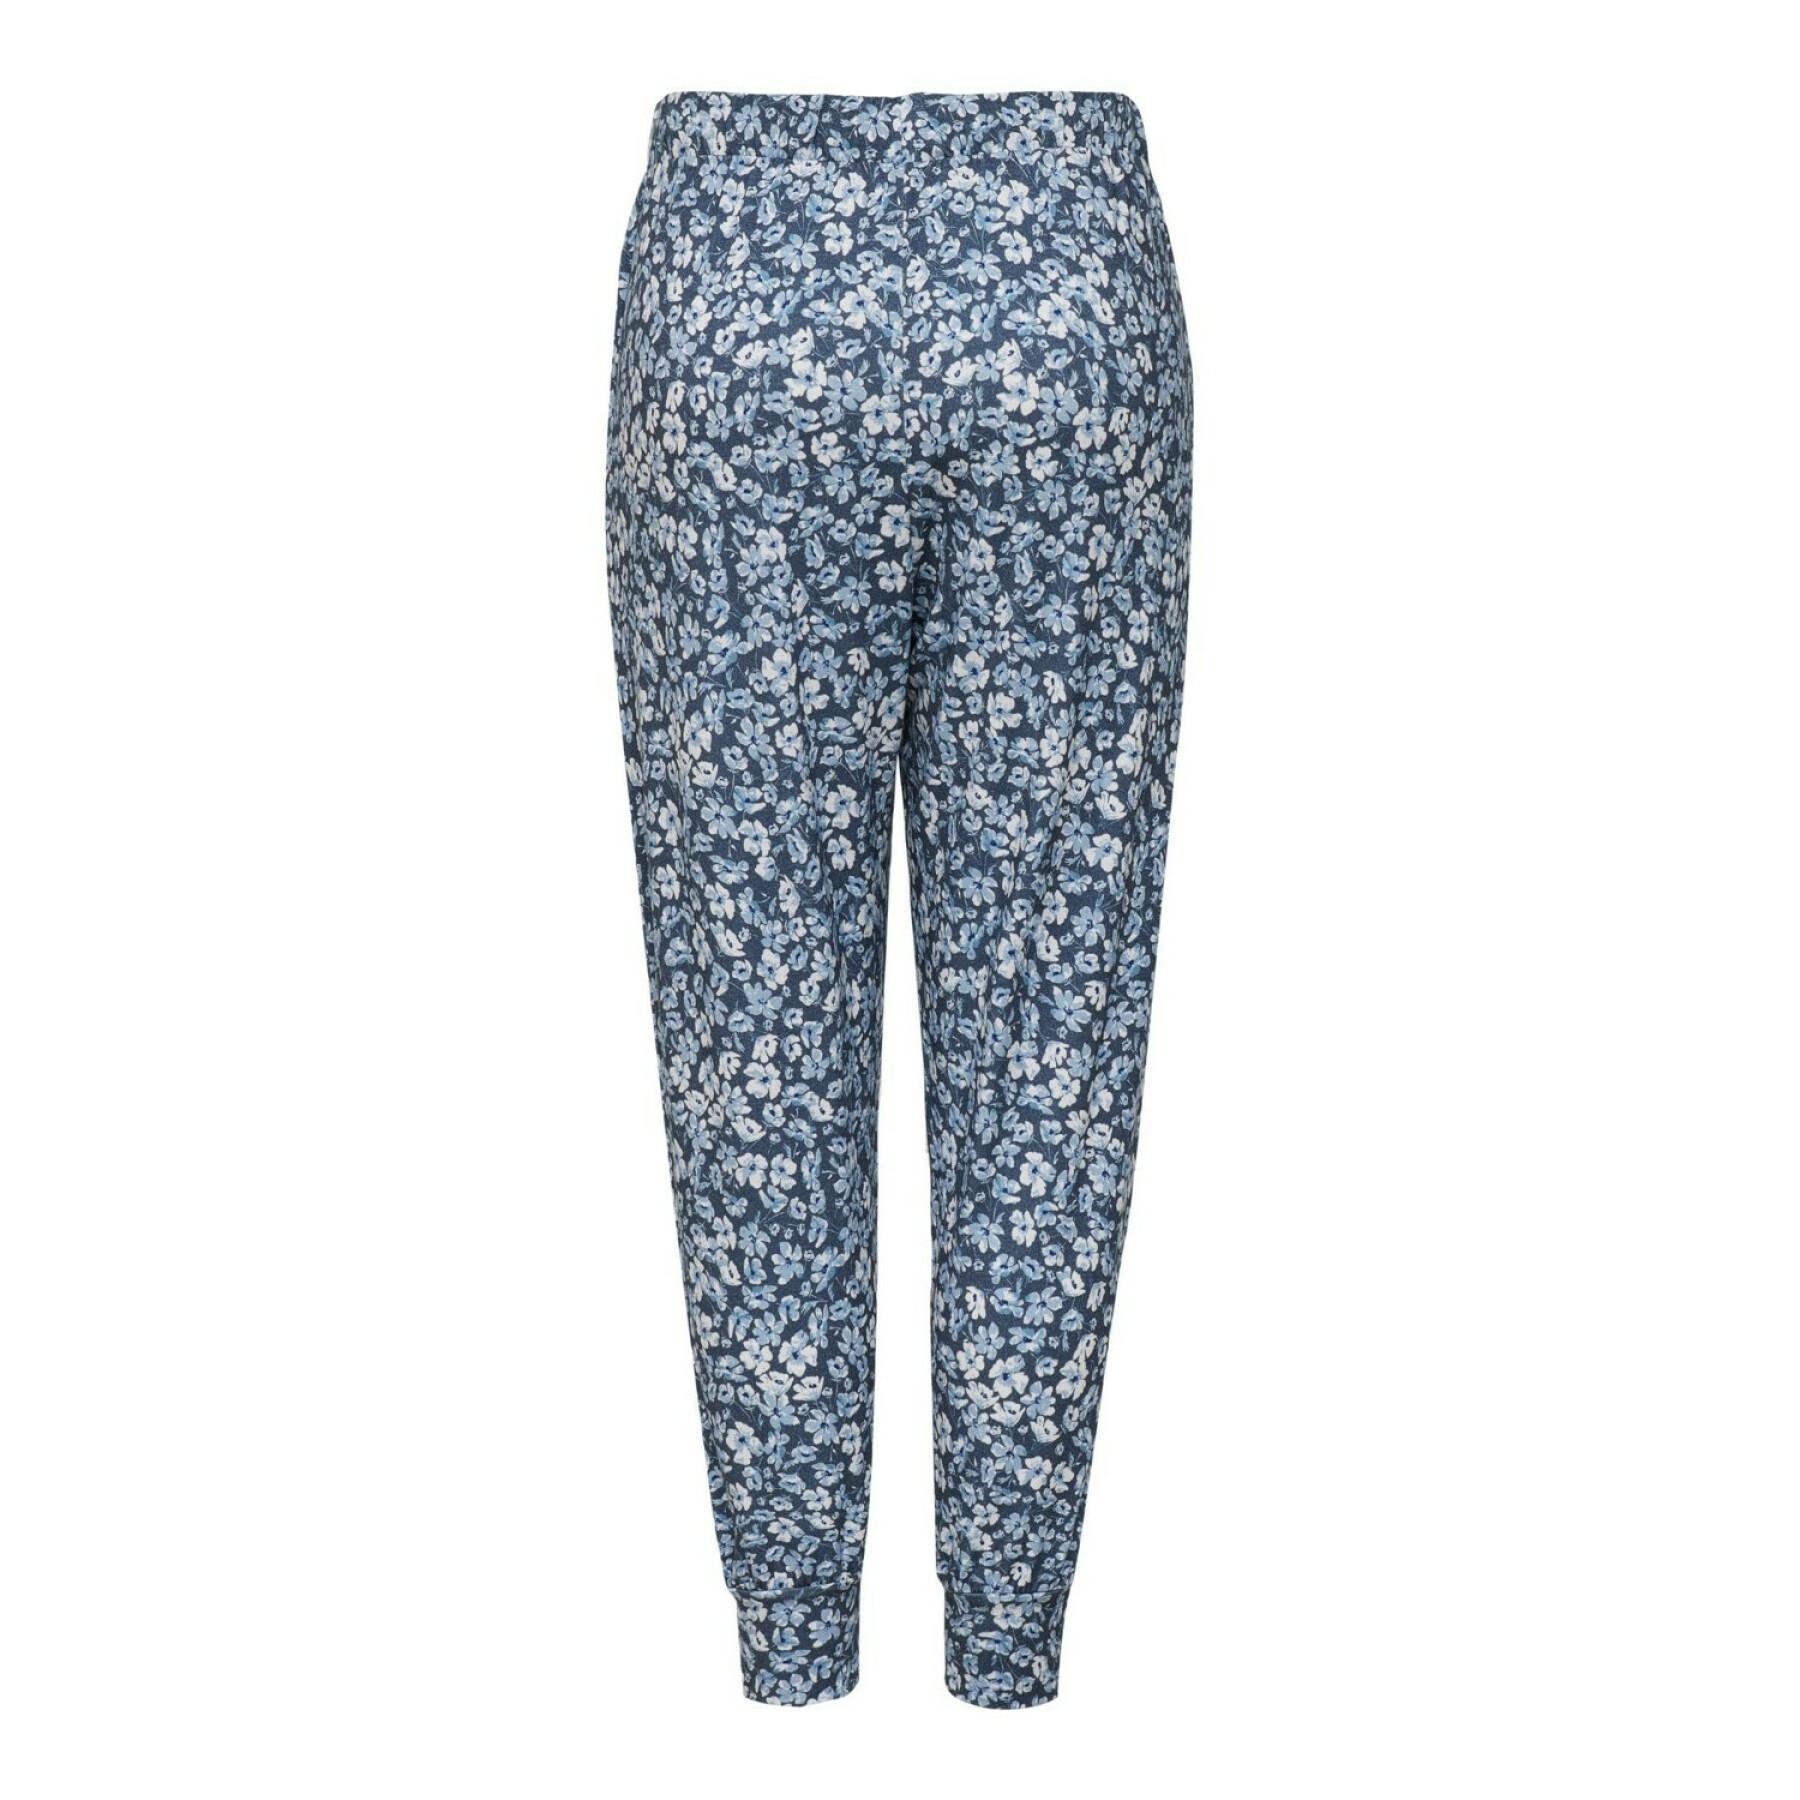 Women's trousers Only onlmoster aops